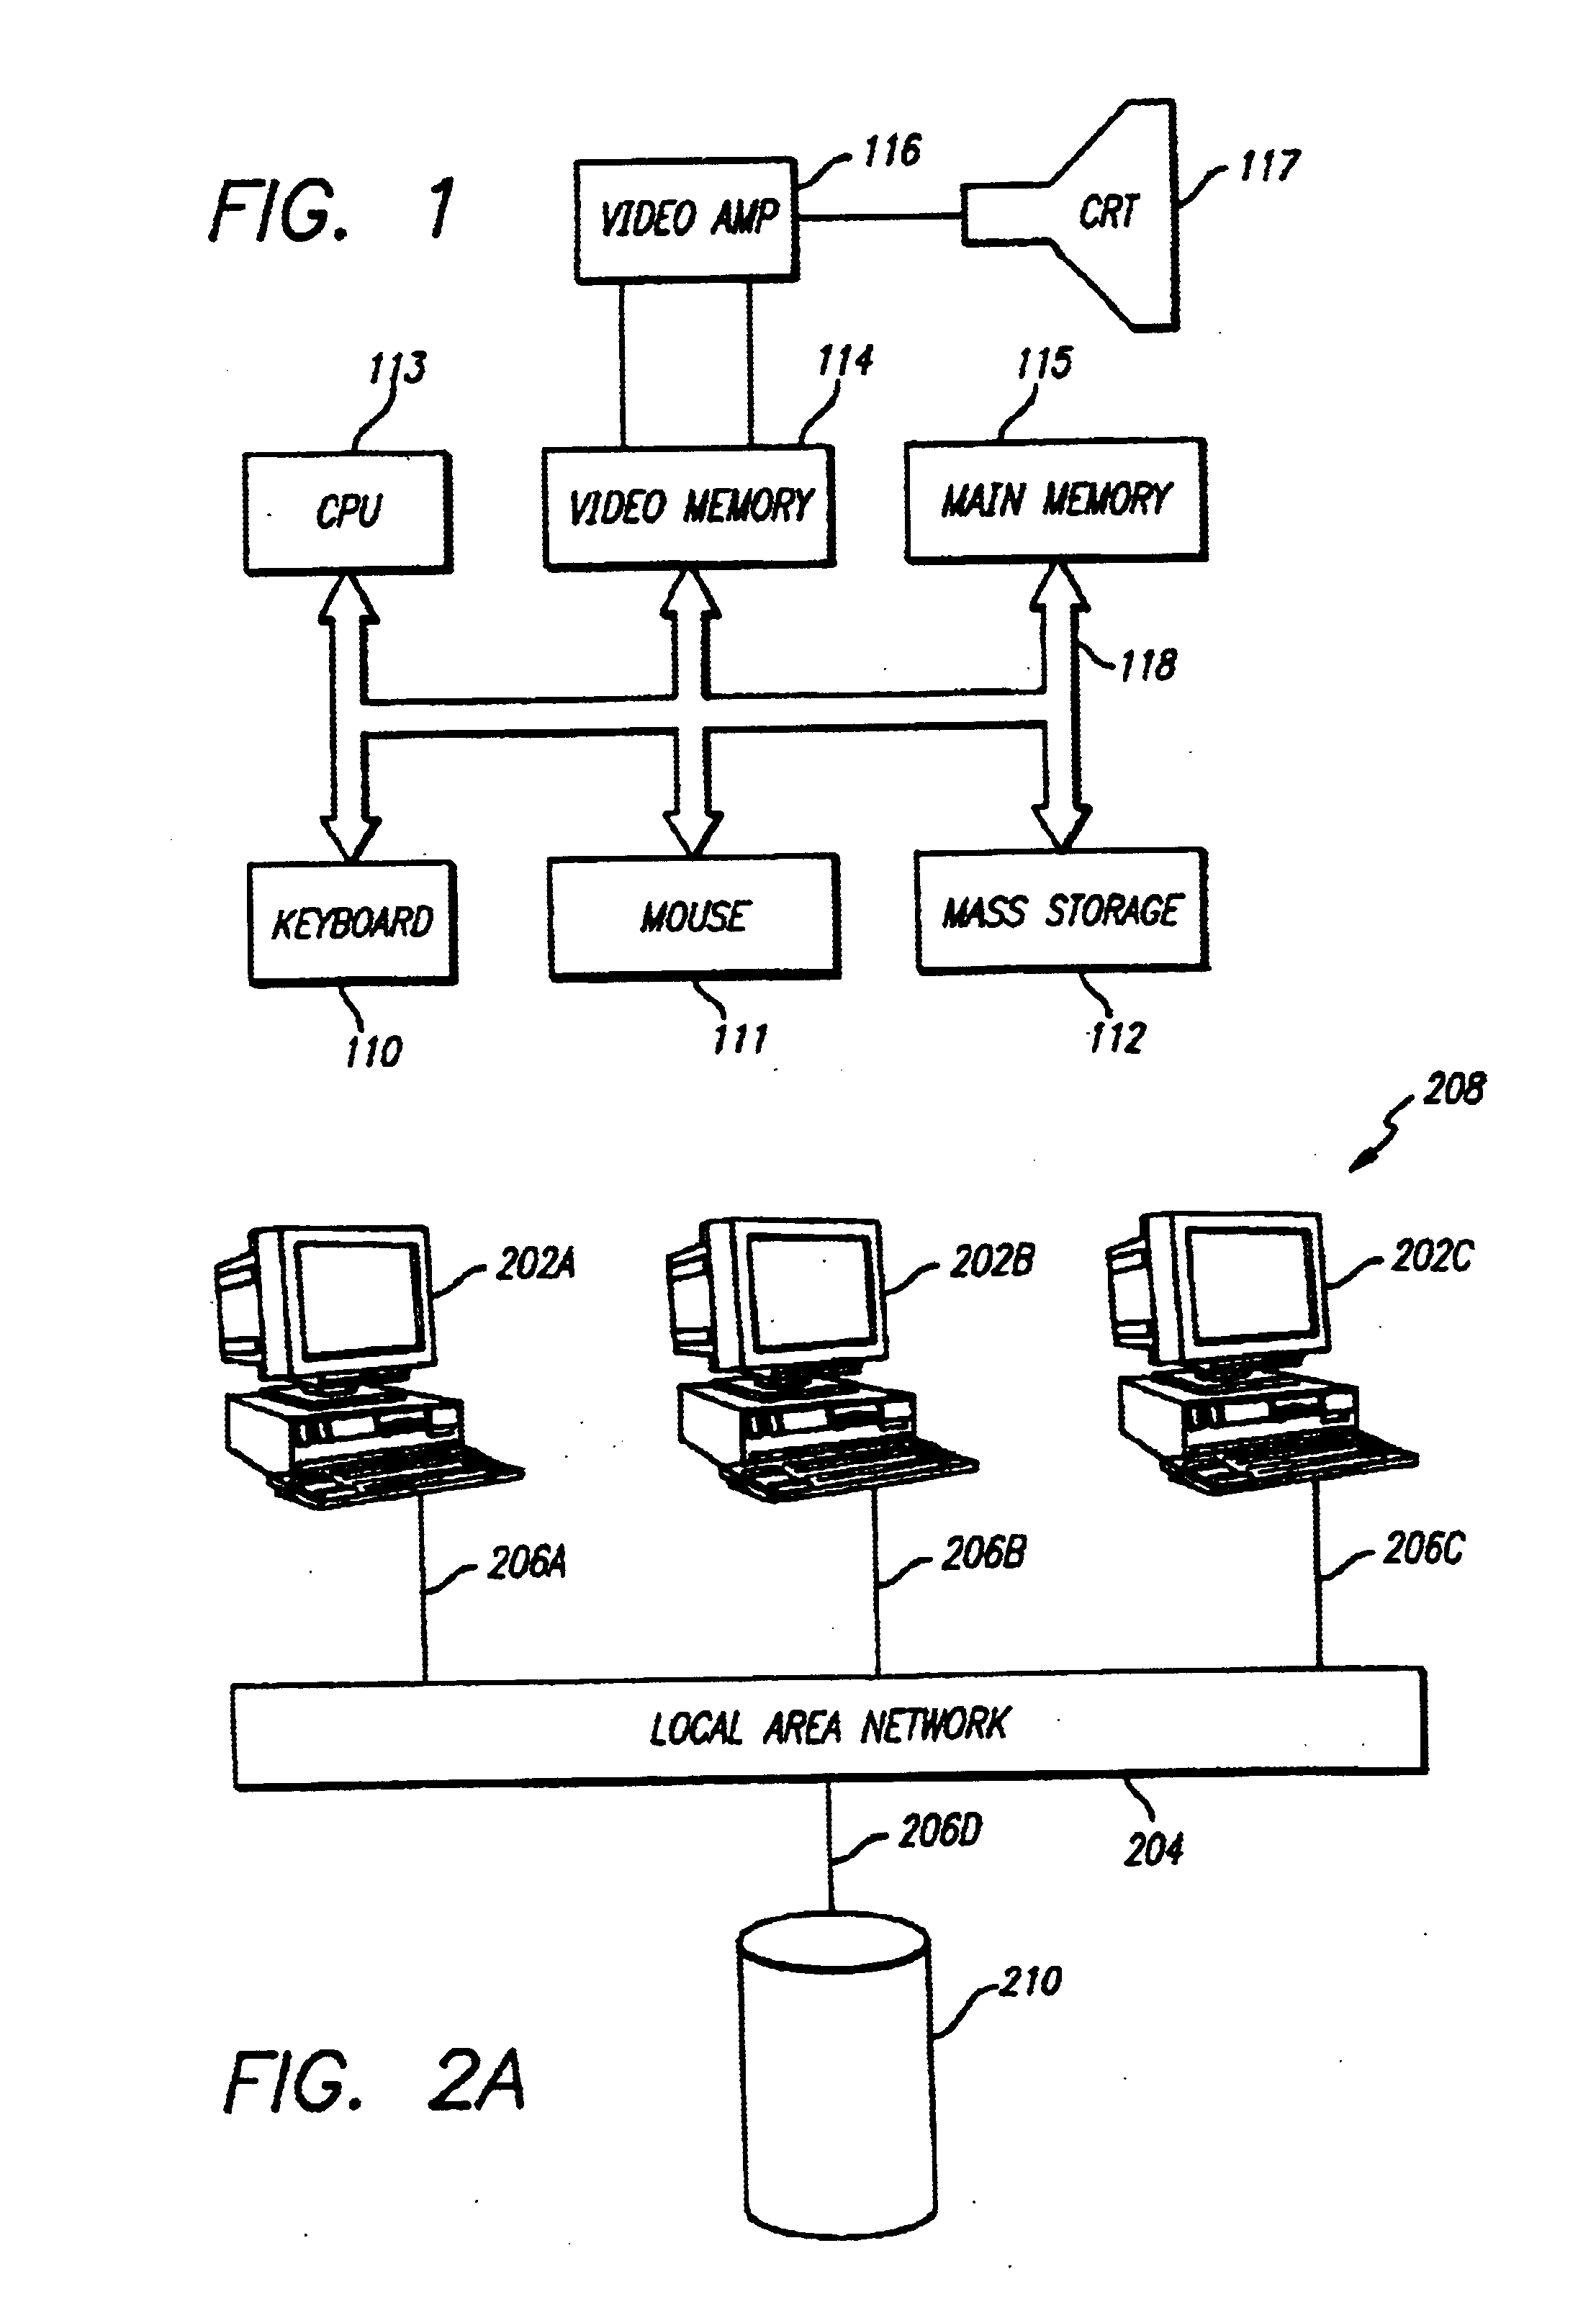 Method and apparatus for workgroup information replication